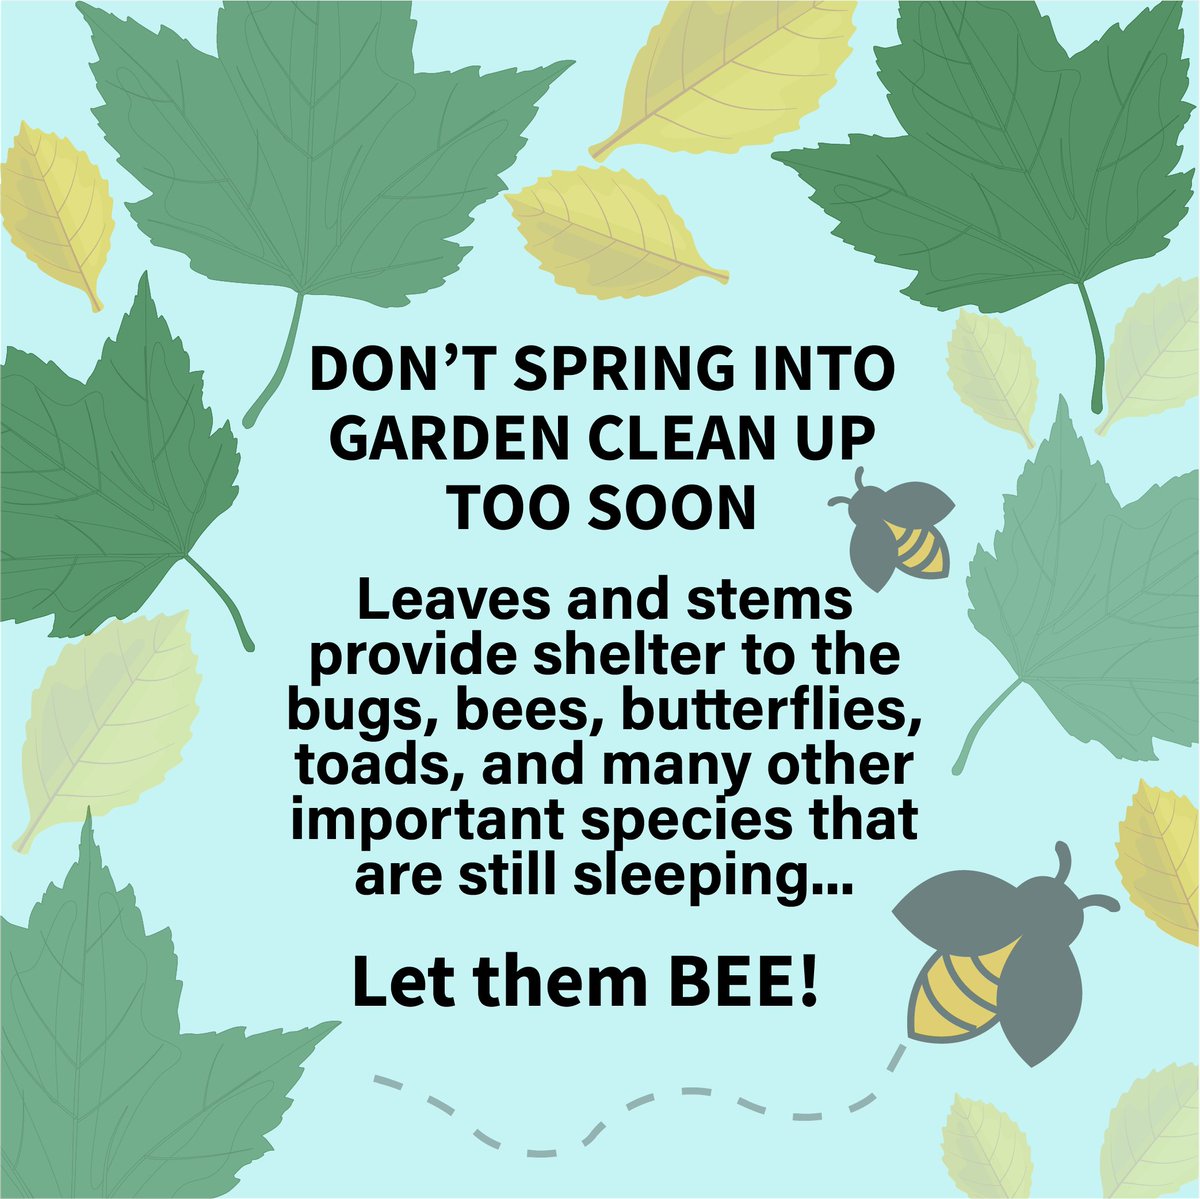 It's the time of year we are all getting excited to bee outside. But please remember to let your garden sleep in just a little bit longer. Once temperatures are consistently above 10°C or 50°F, you can go wild! #LetThemBee #Spring #Gardening #Pollinators